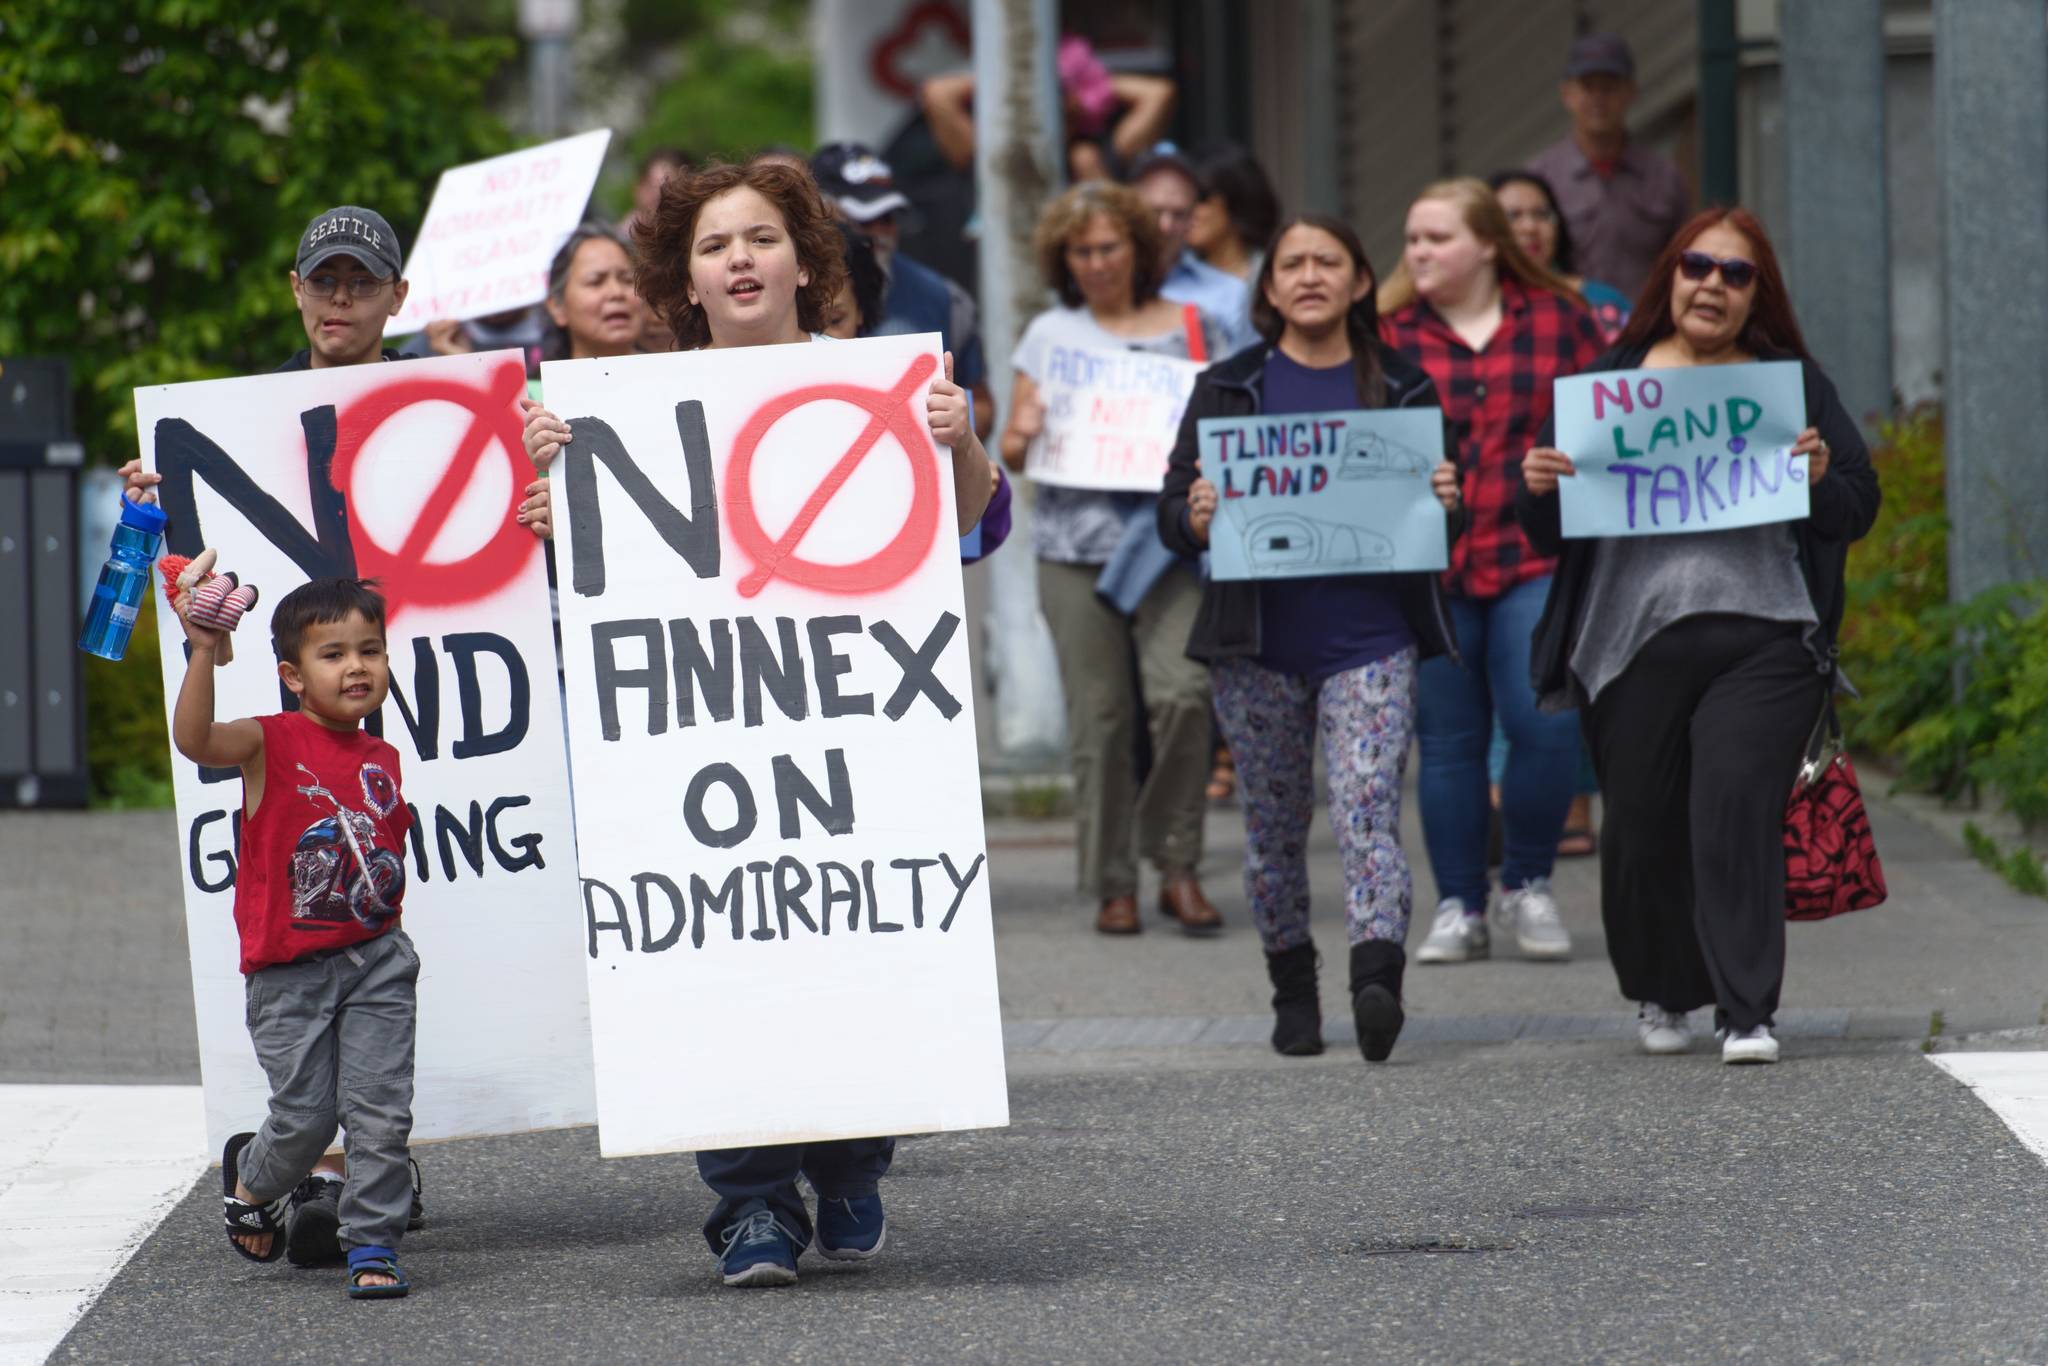 Protesters walk down Main Street in Juneau to protest against the City and Borough of Juneau’s annexation of parts of Admiralty Island on Friday, June 14, 2019. (Michael Penn | Juneau Empire)